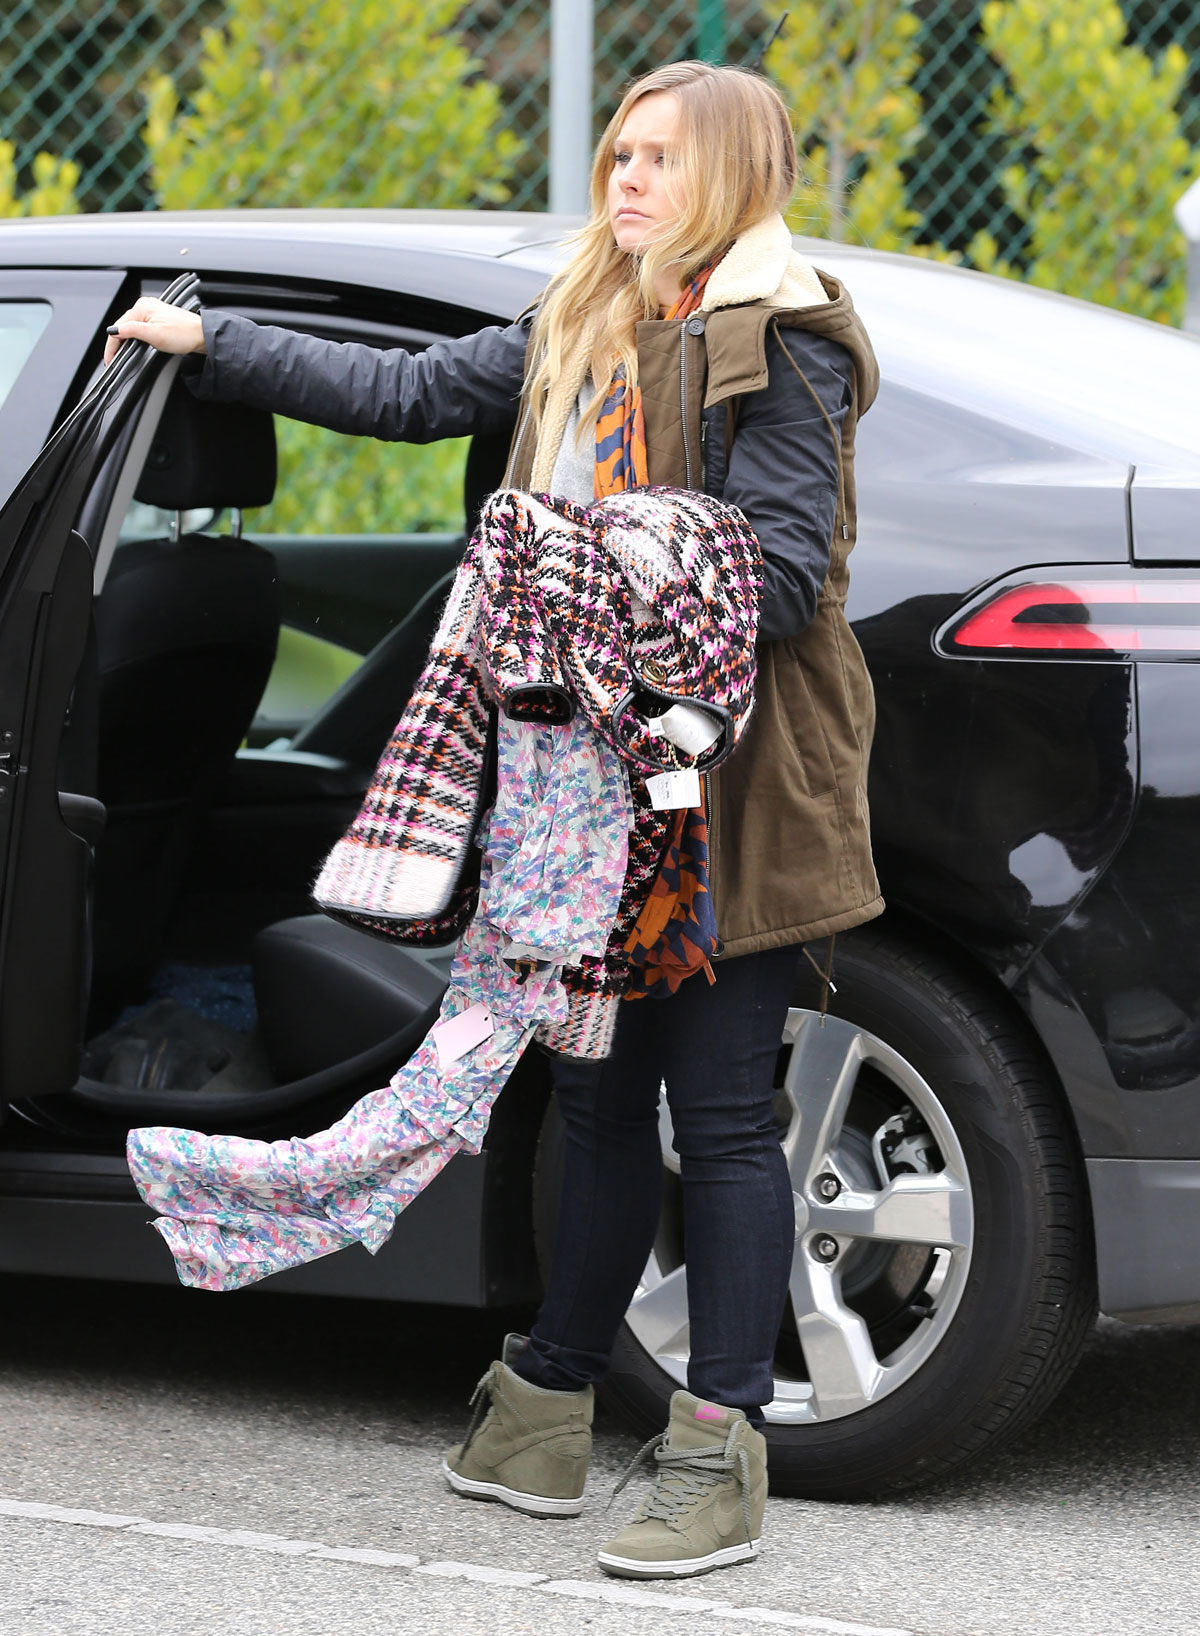 KRISTEN BELL Out and About in Beverly Hills.